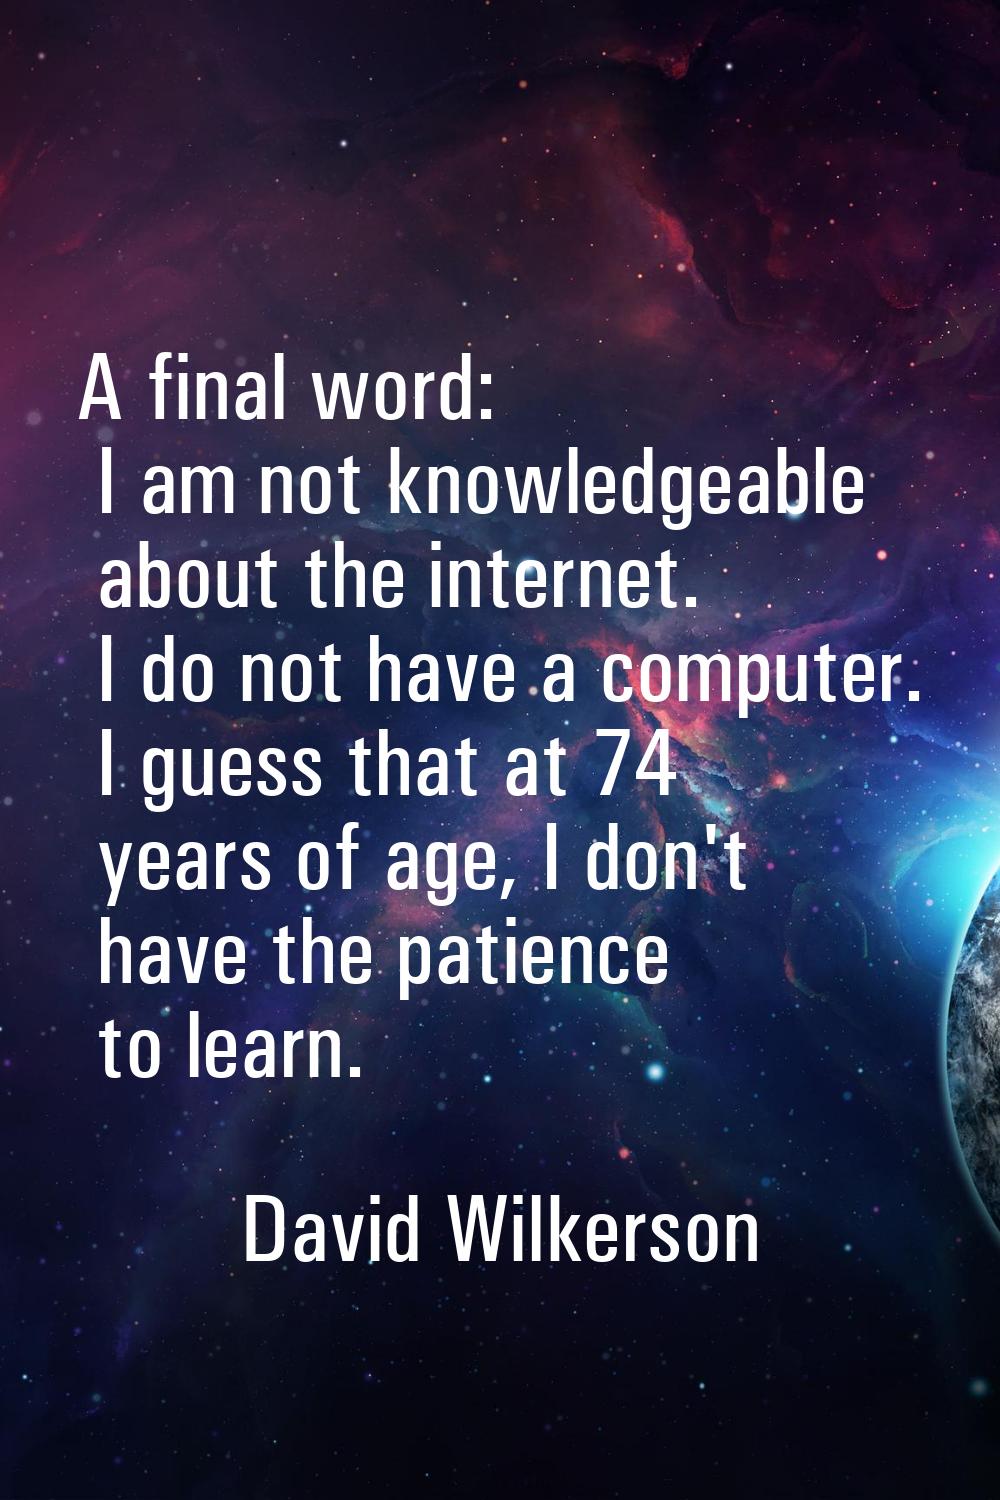 A final word: I am not knowledgeable about the internet. I do not have a computer. I guess that at 